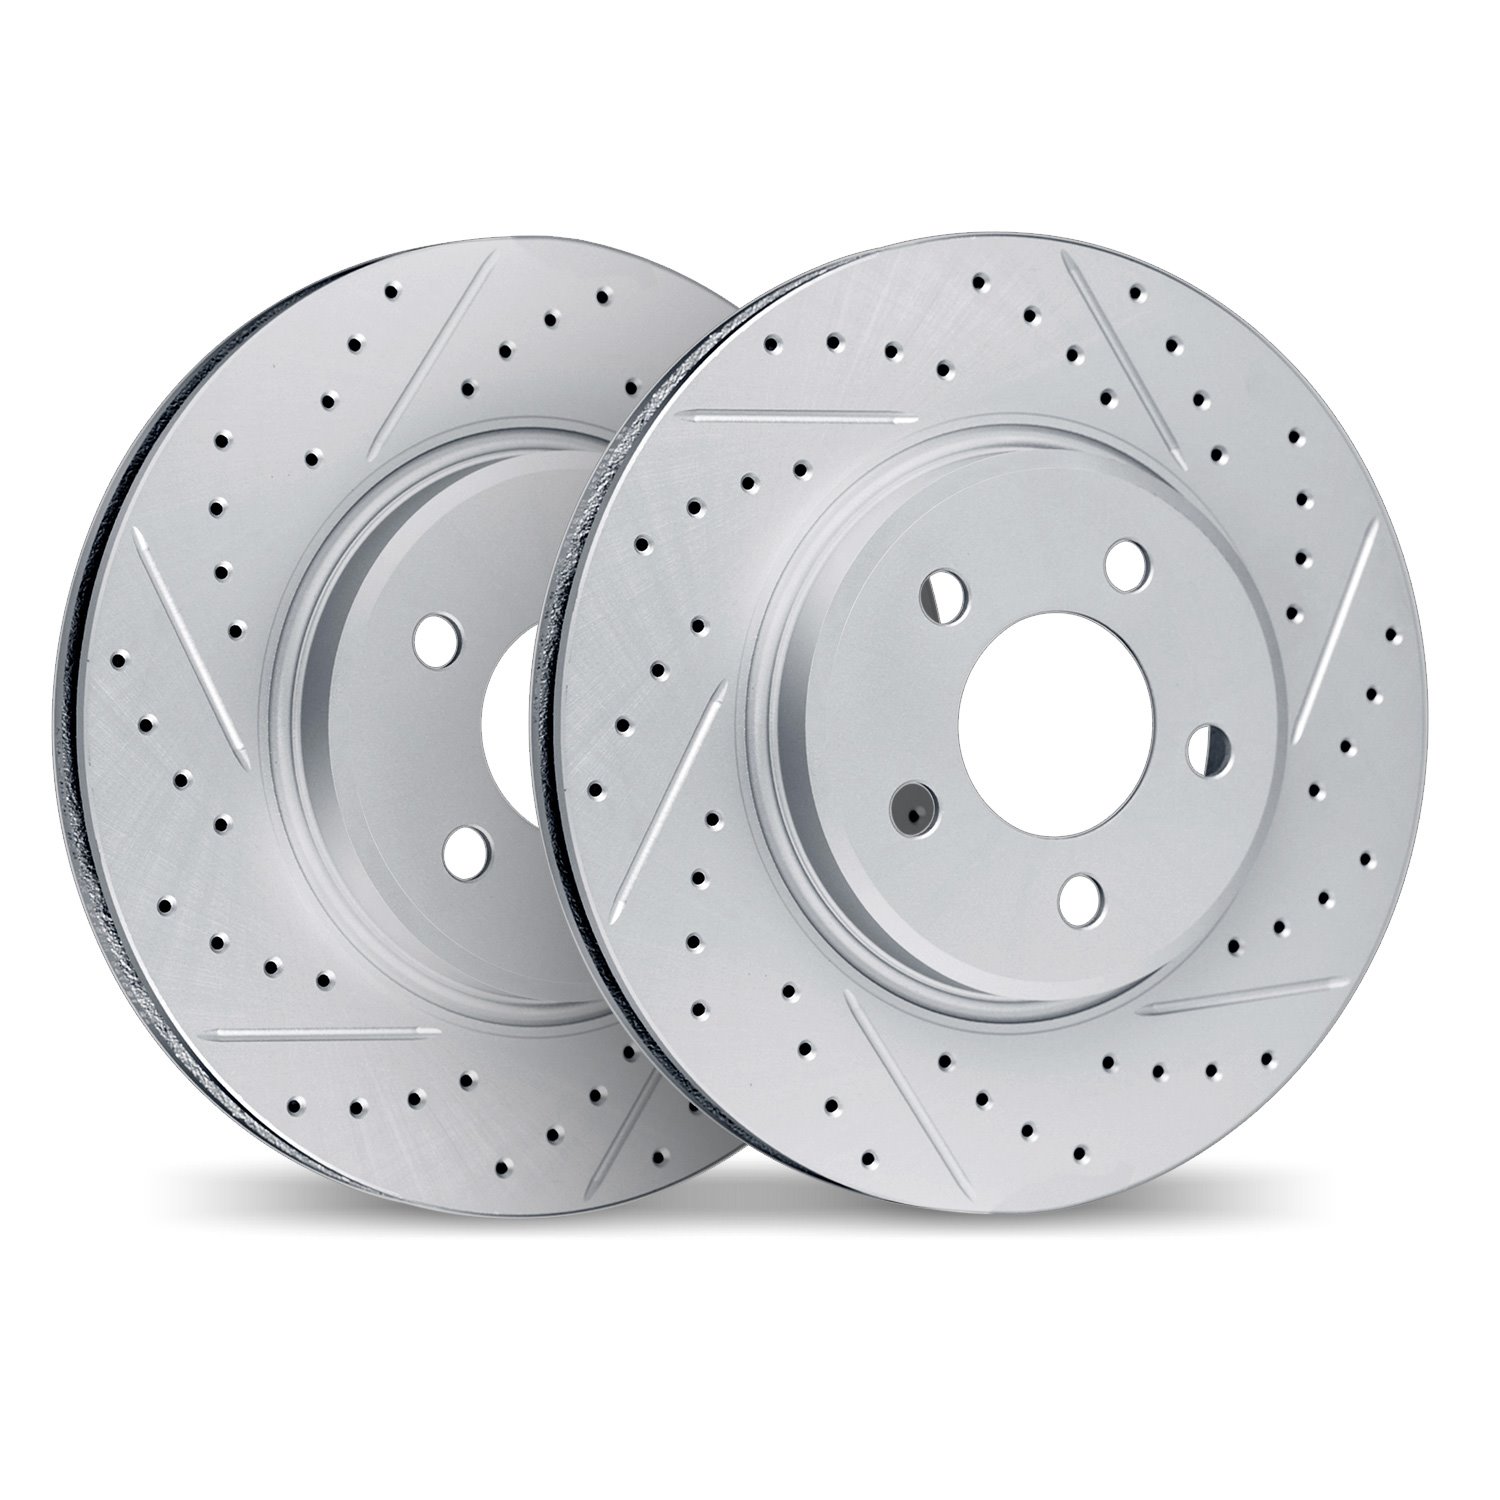 2002-76062 Geoperformance Drilled/Slotted Brake Rotors, Fits Select Lexus/Toyota/Scion, Position: Rear